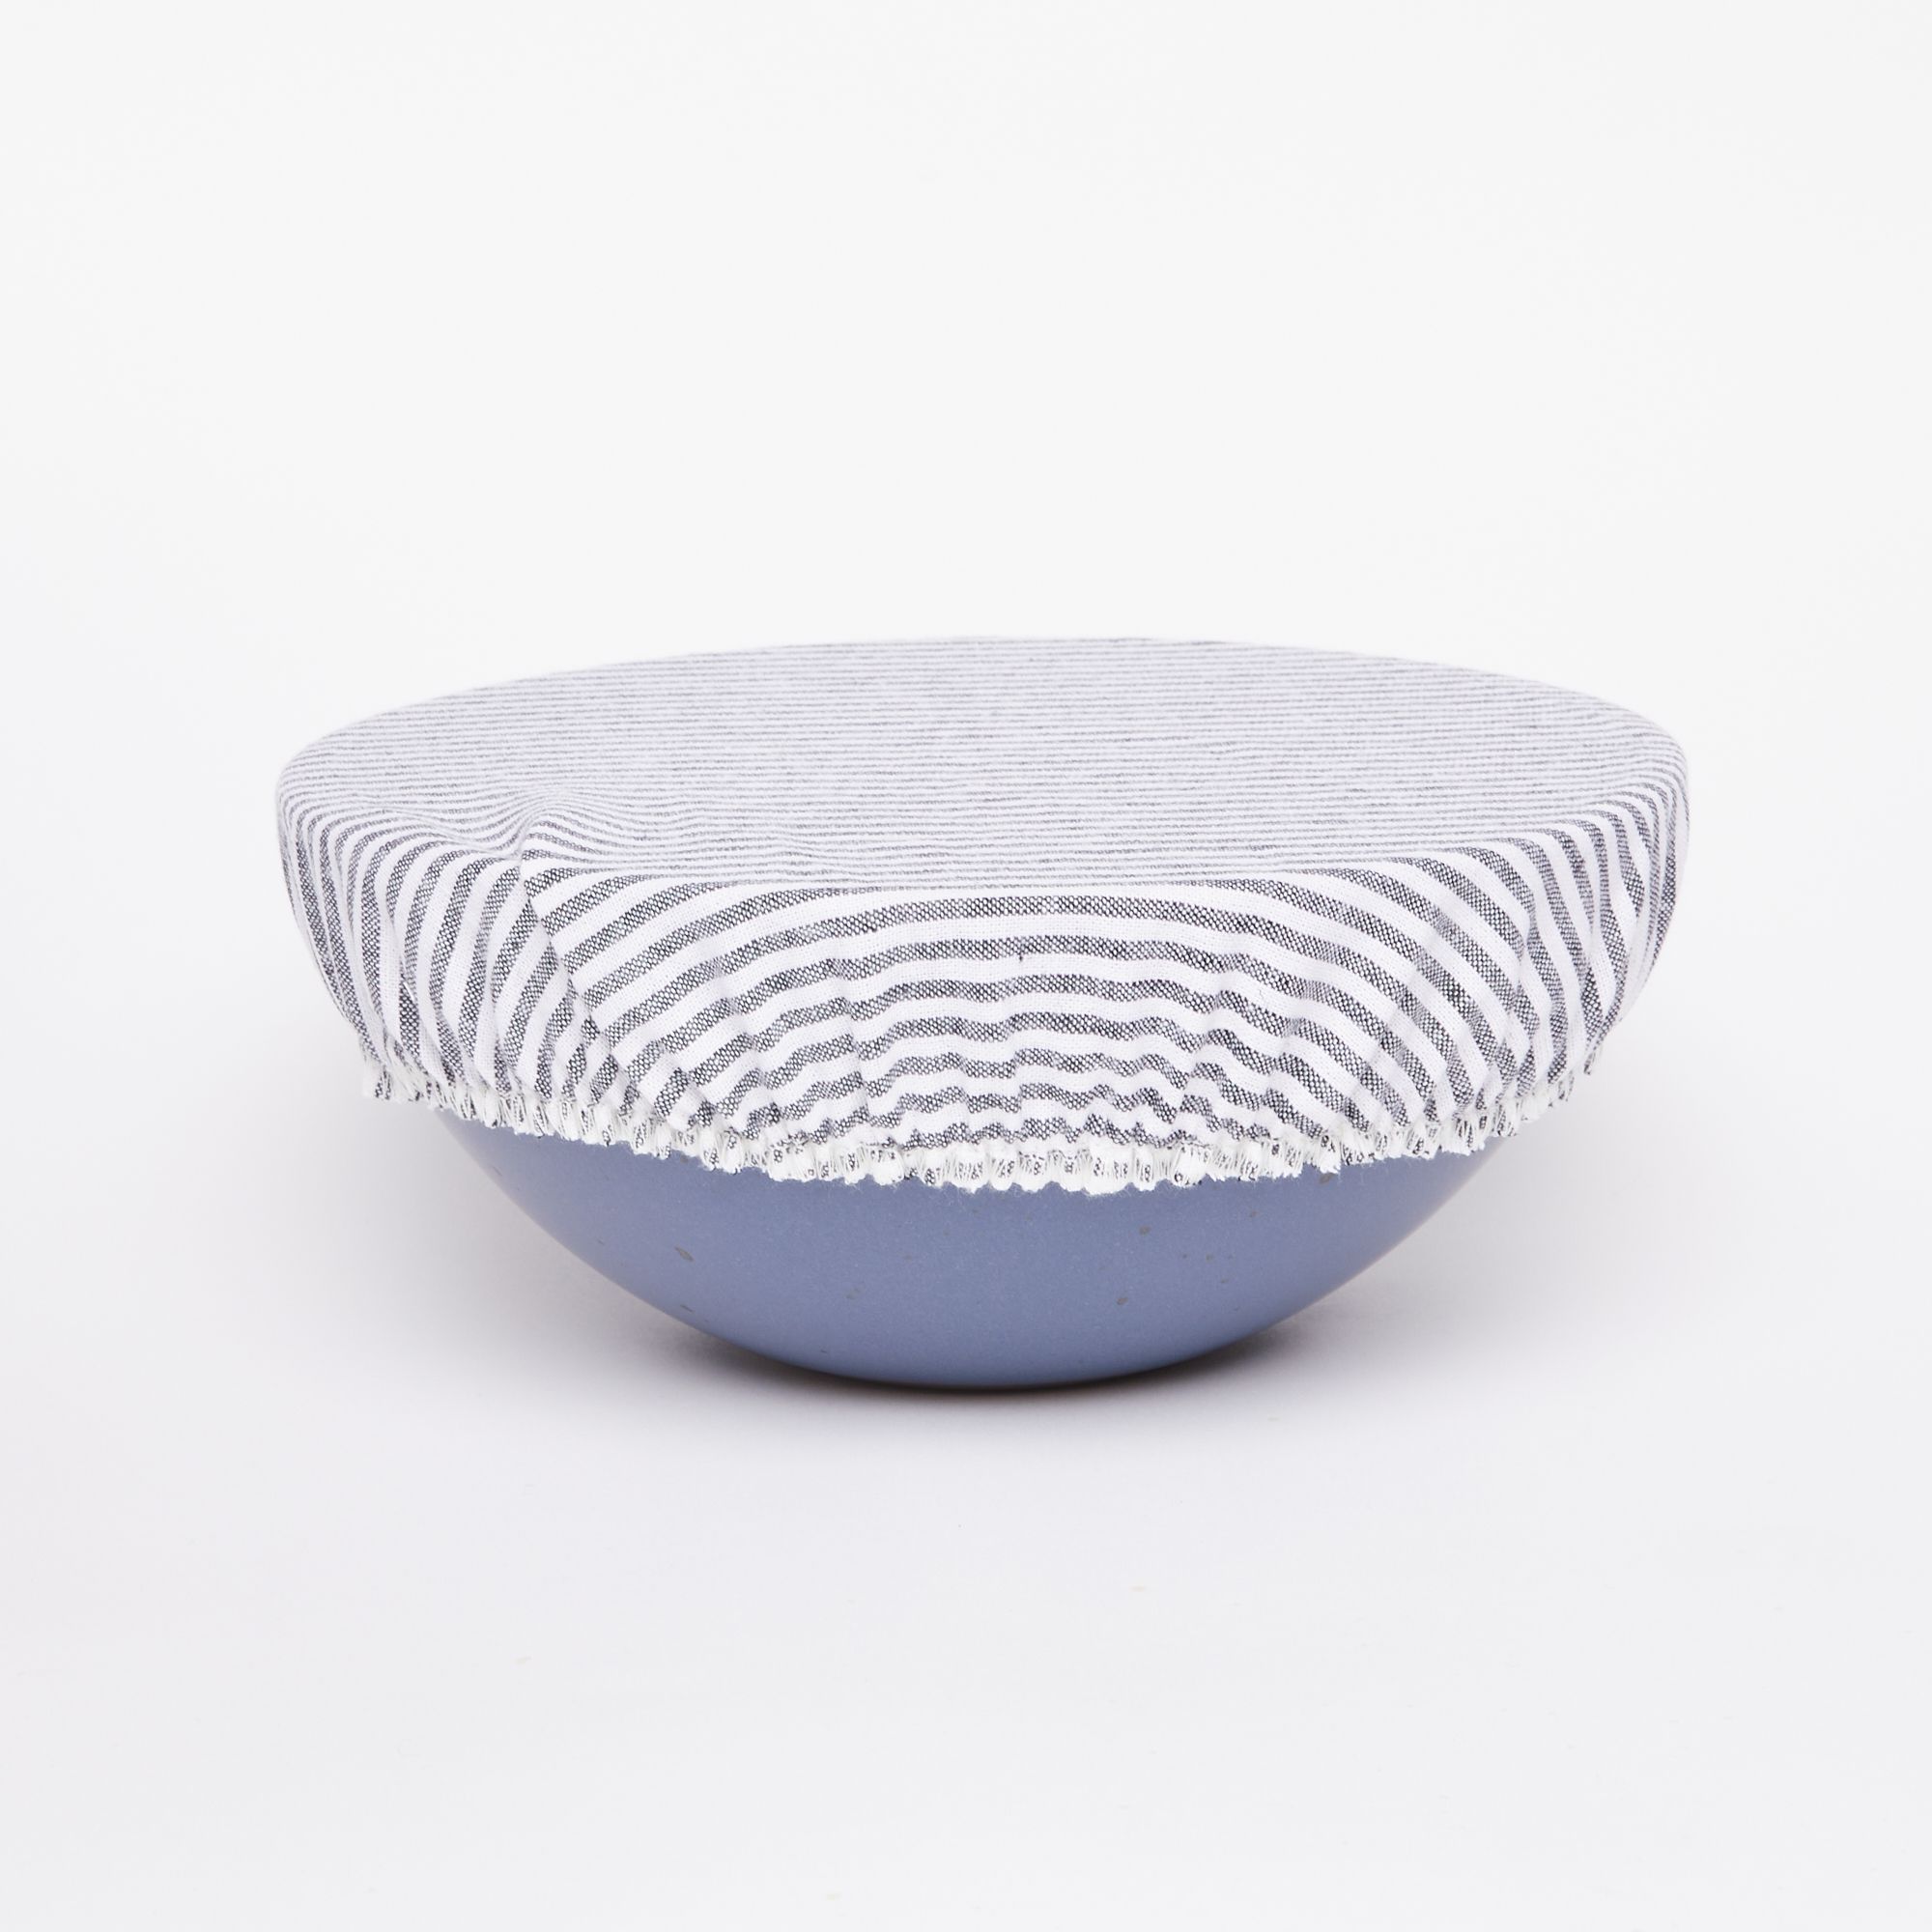 Popcorn bowl with white linen bowl cover with thin blue stripes